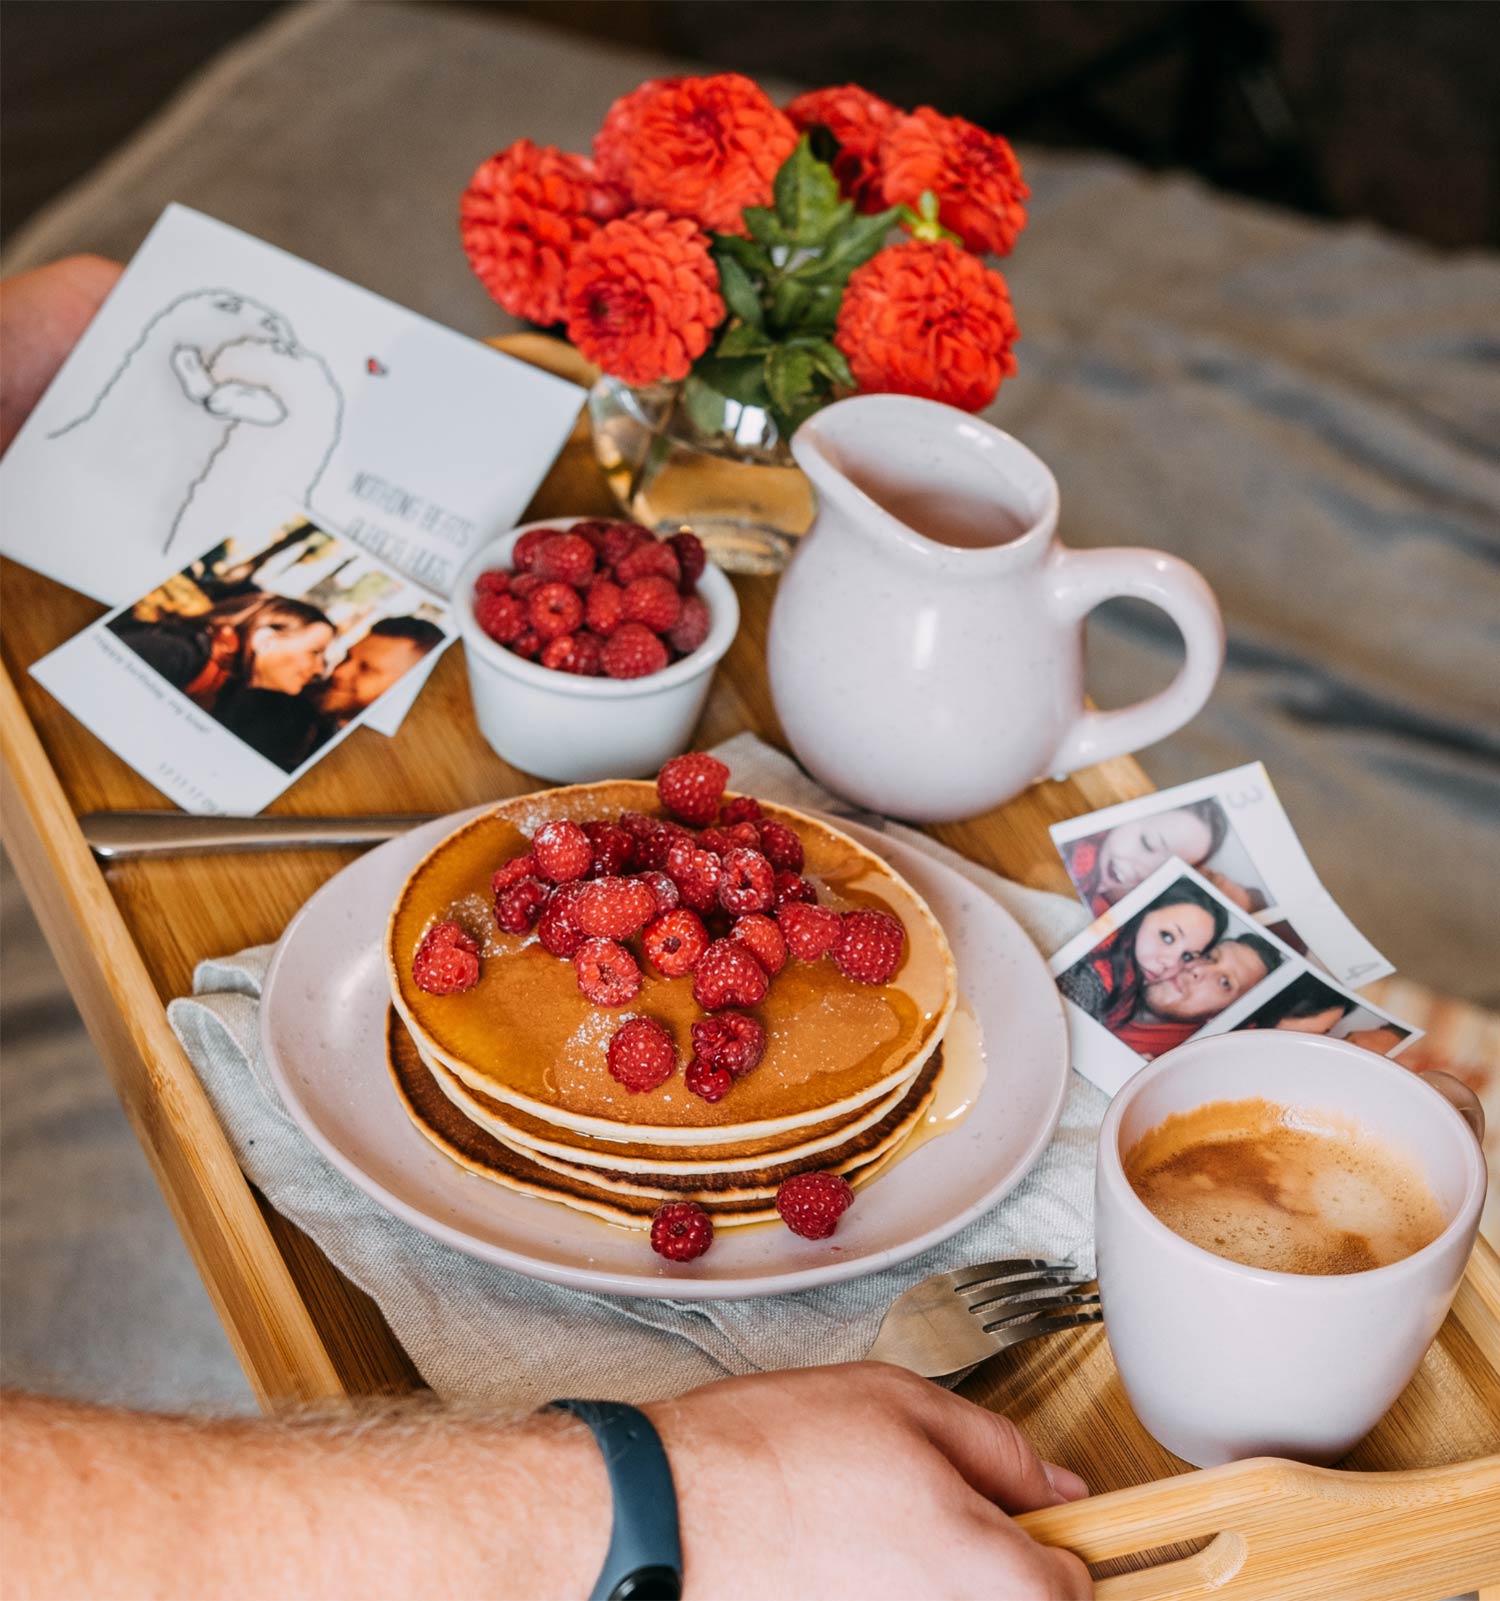 Things to do on Valentine's Day - Prepare for a breakfast in bed date